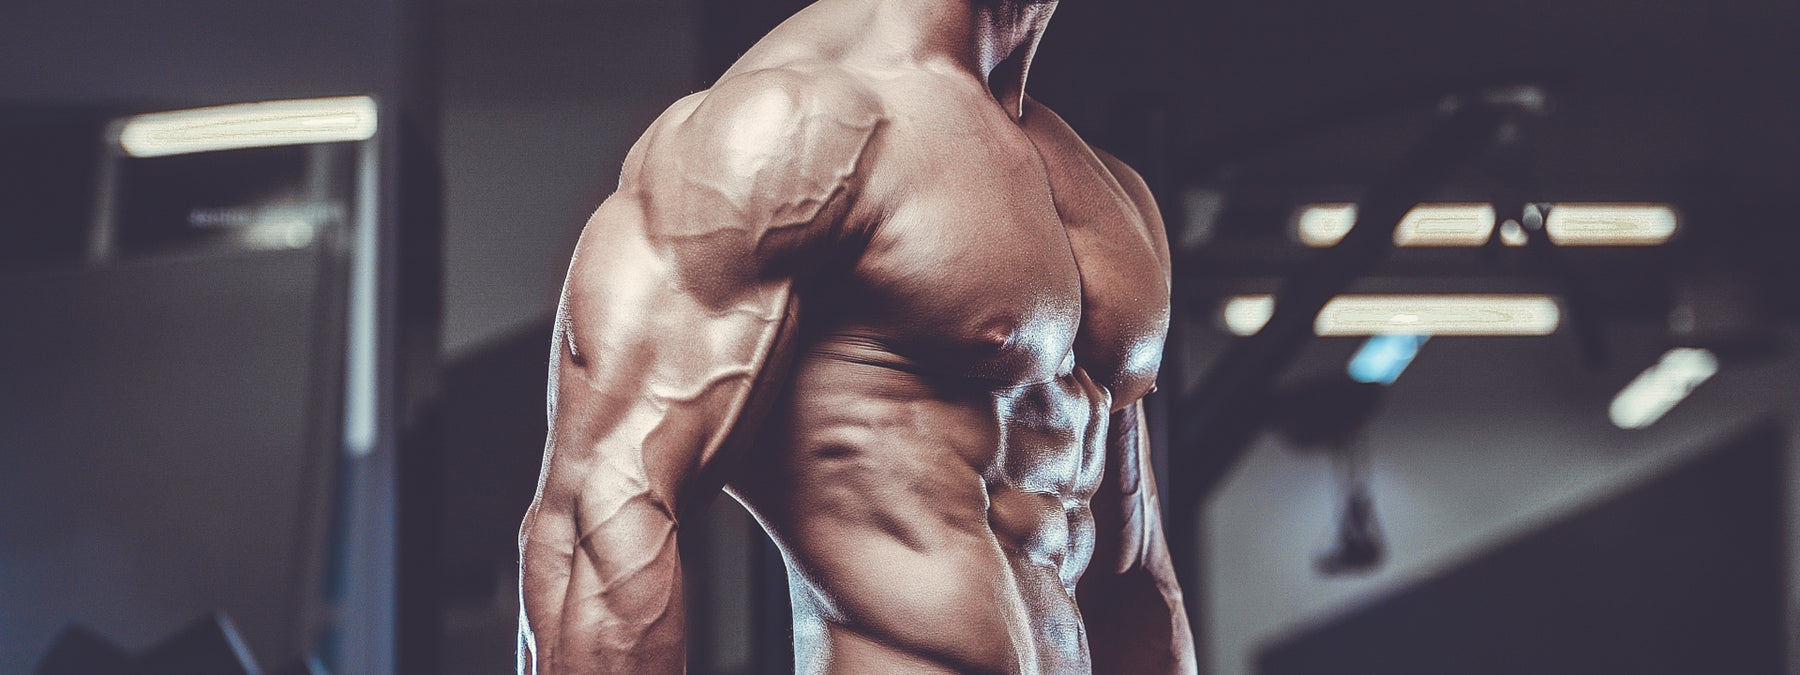 Kick-Start Your Triceps Size With These 3 Tips